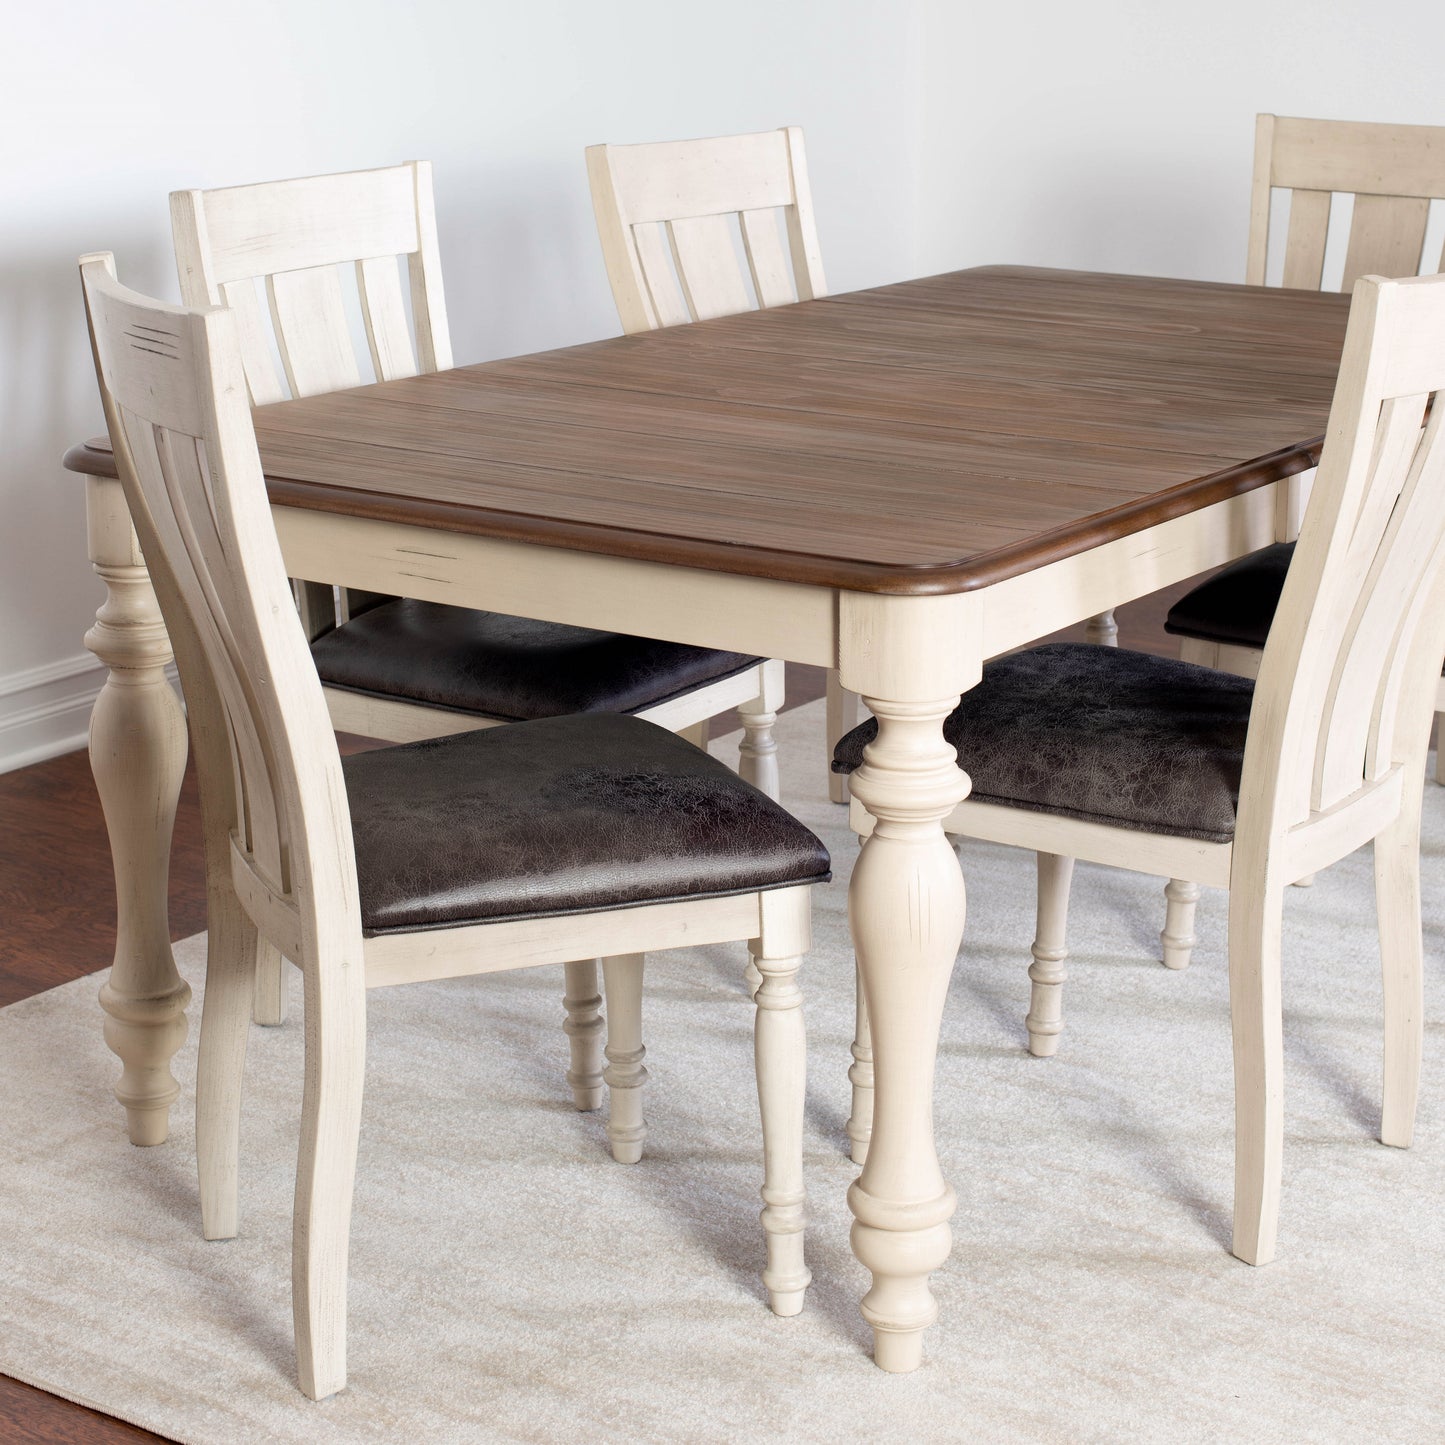 Arch Weathered Oak Dining Set: Table with Extension Leaf, Six Chairs